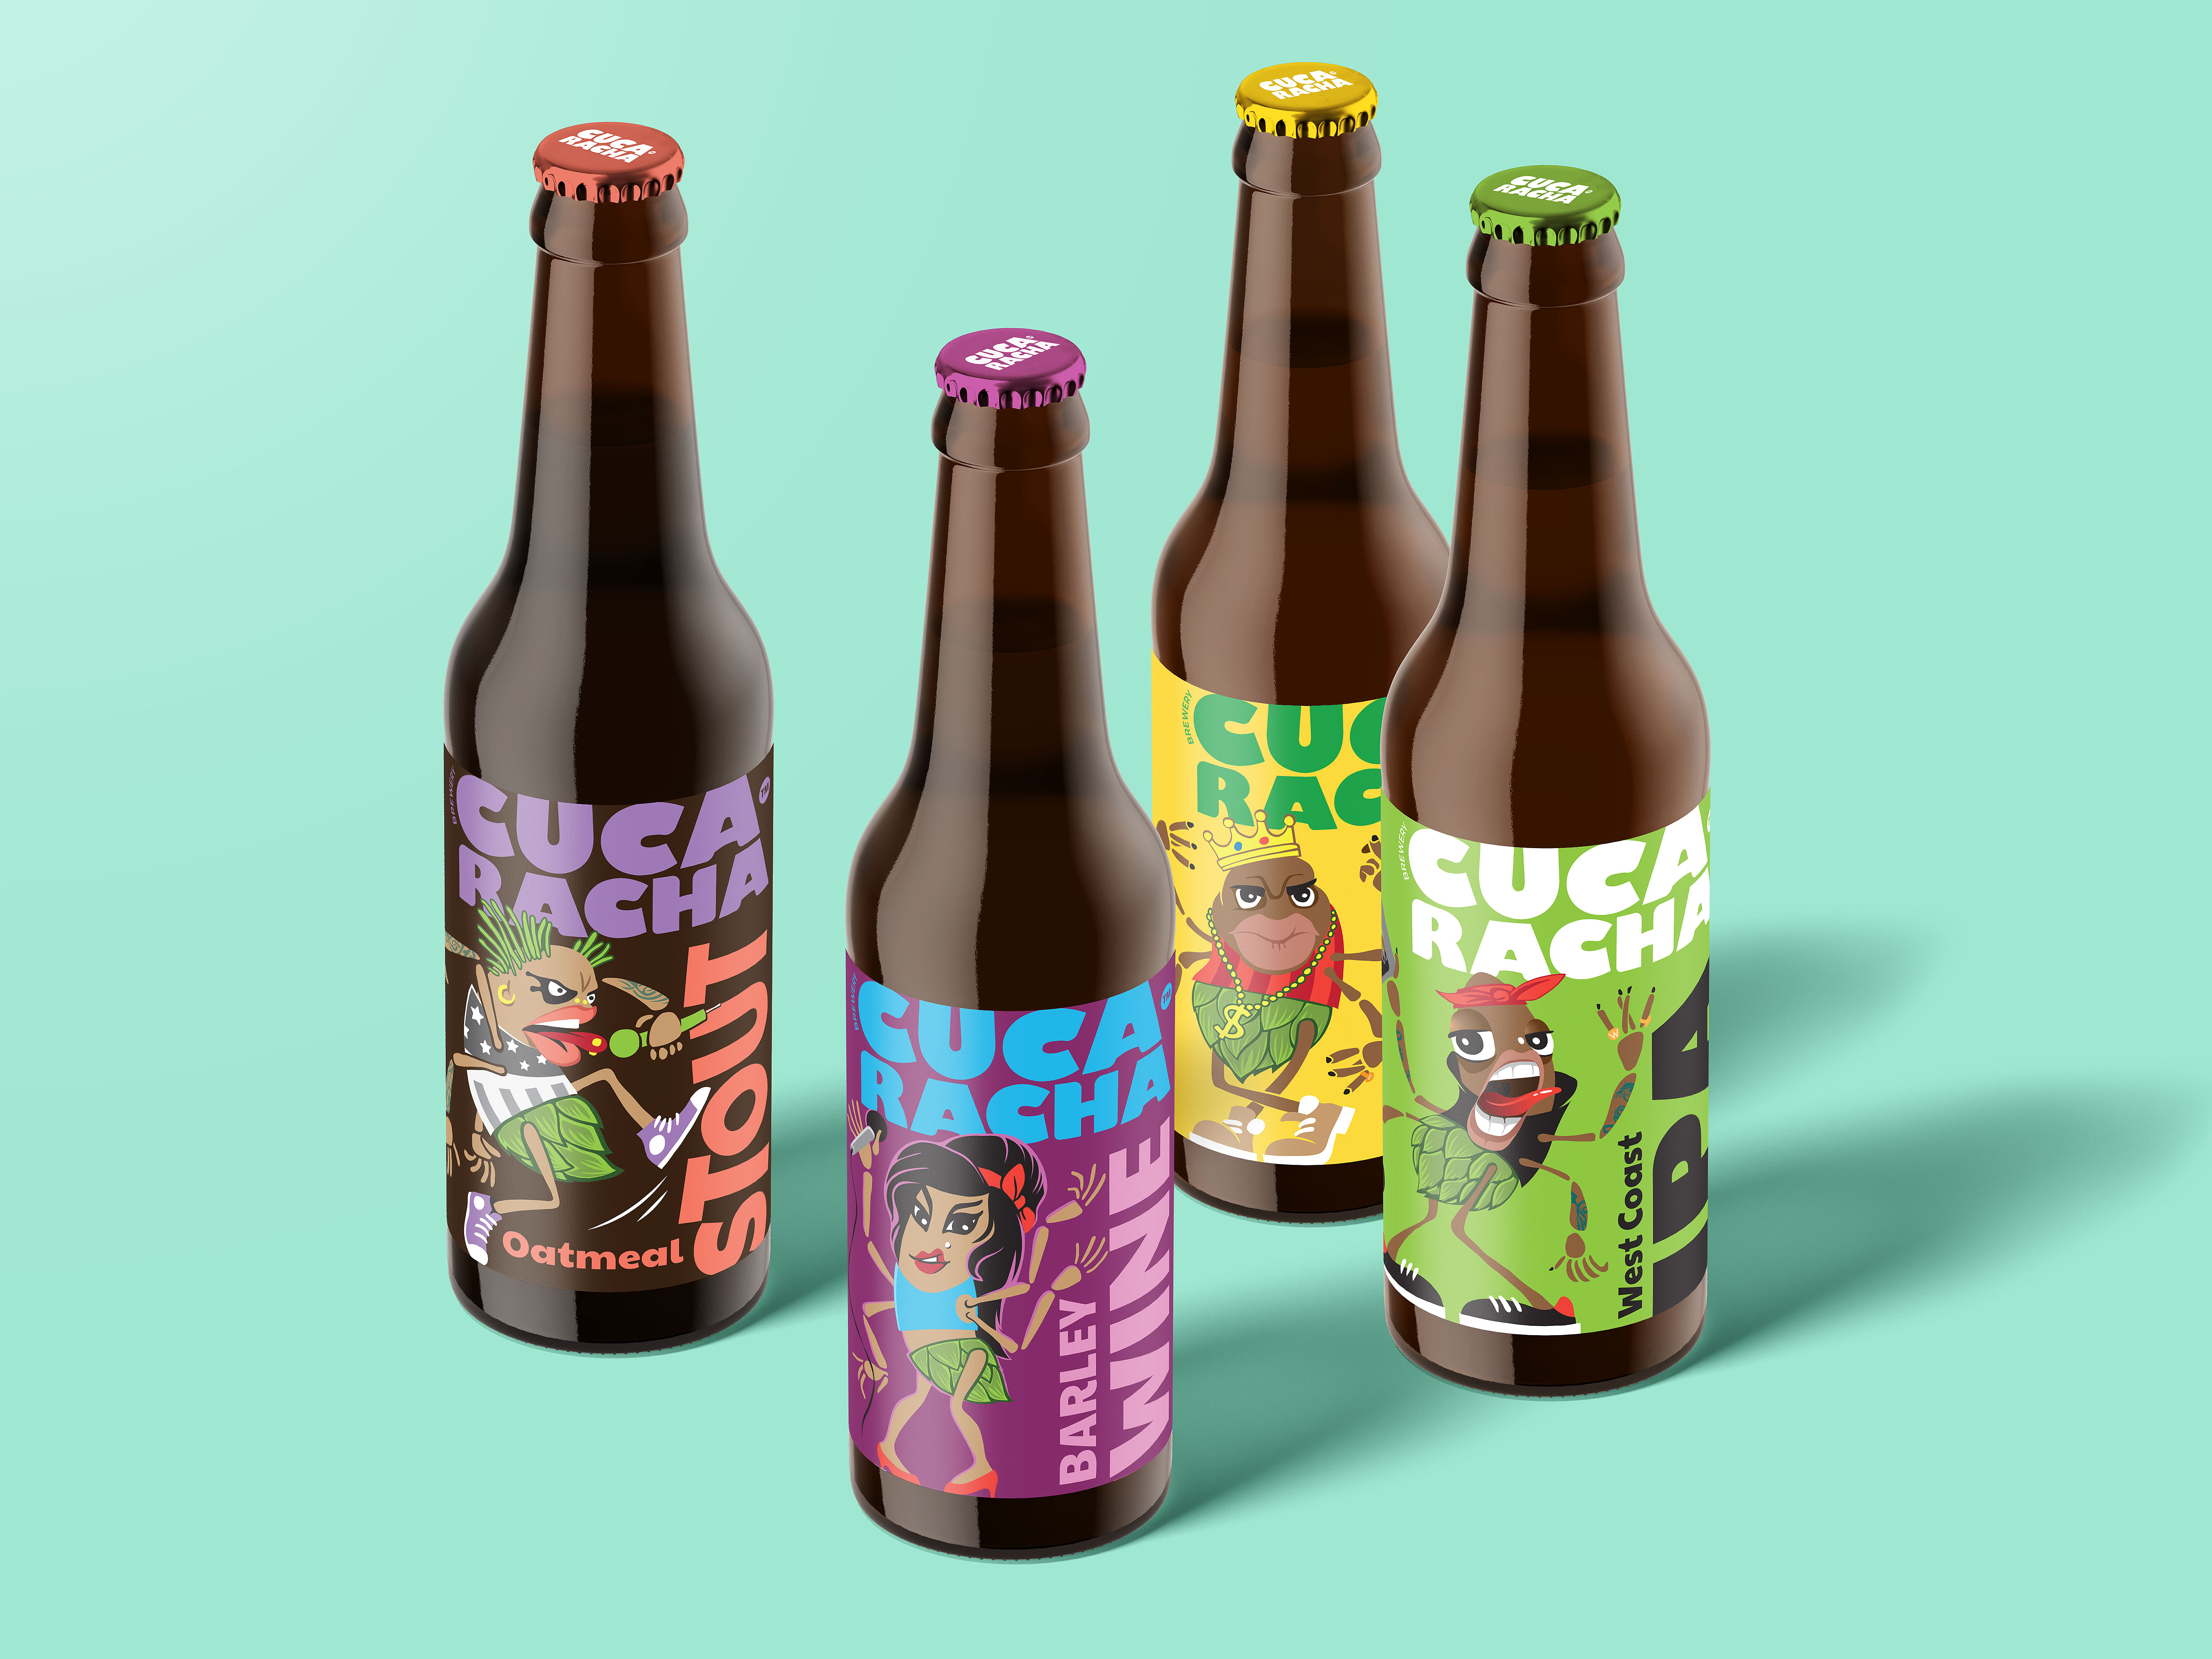 Cucaracha is a New Brand on the Craft Beer Market